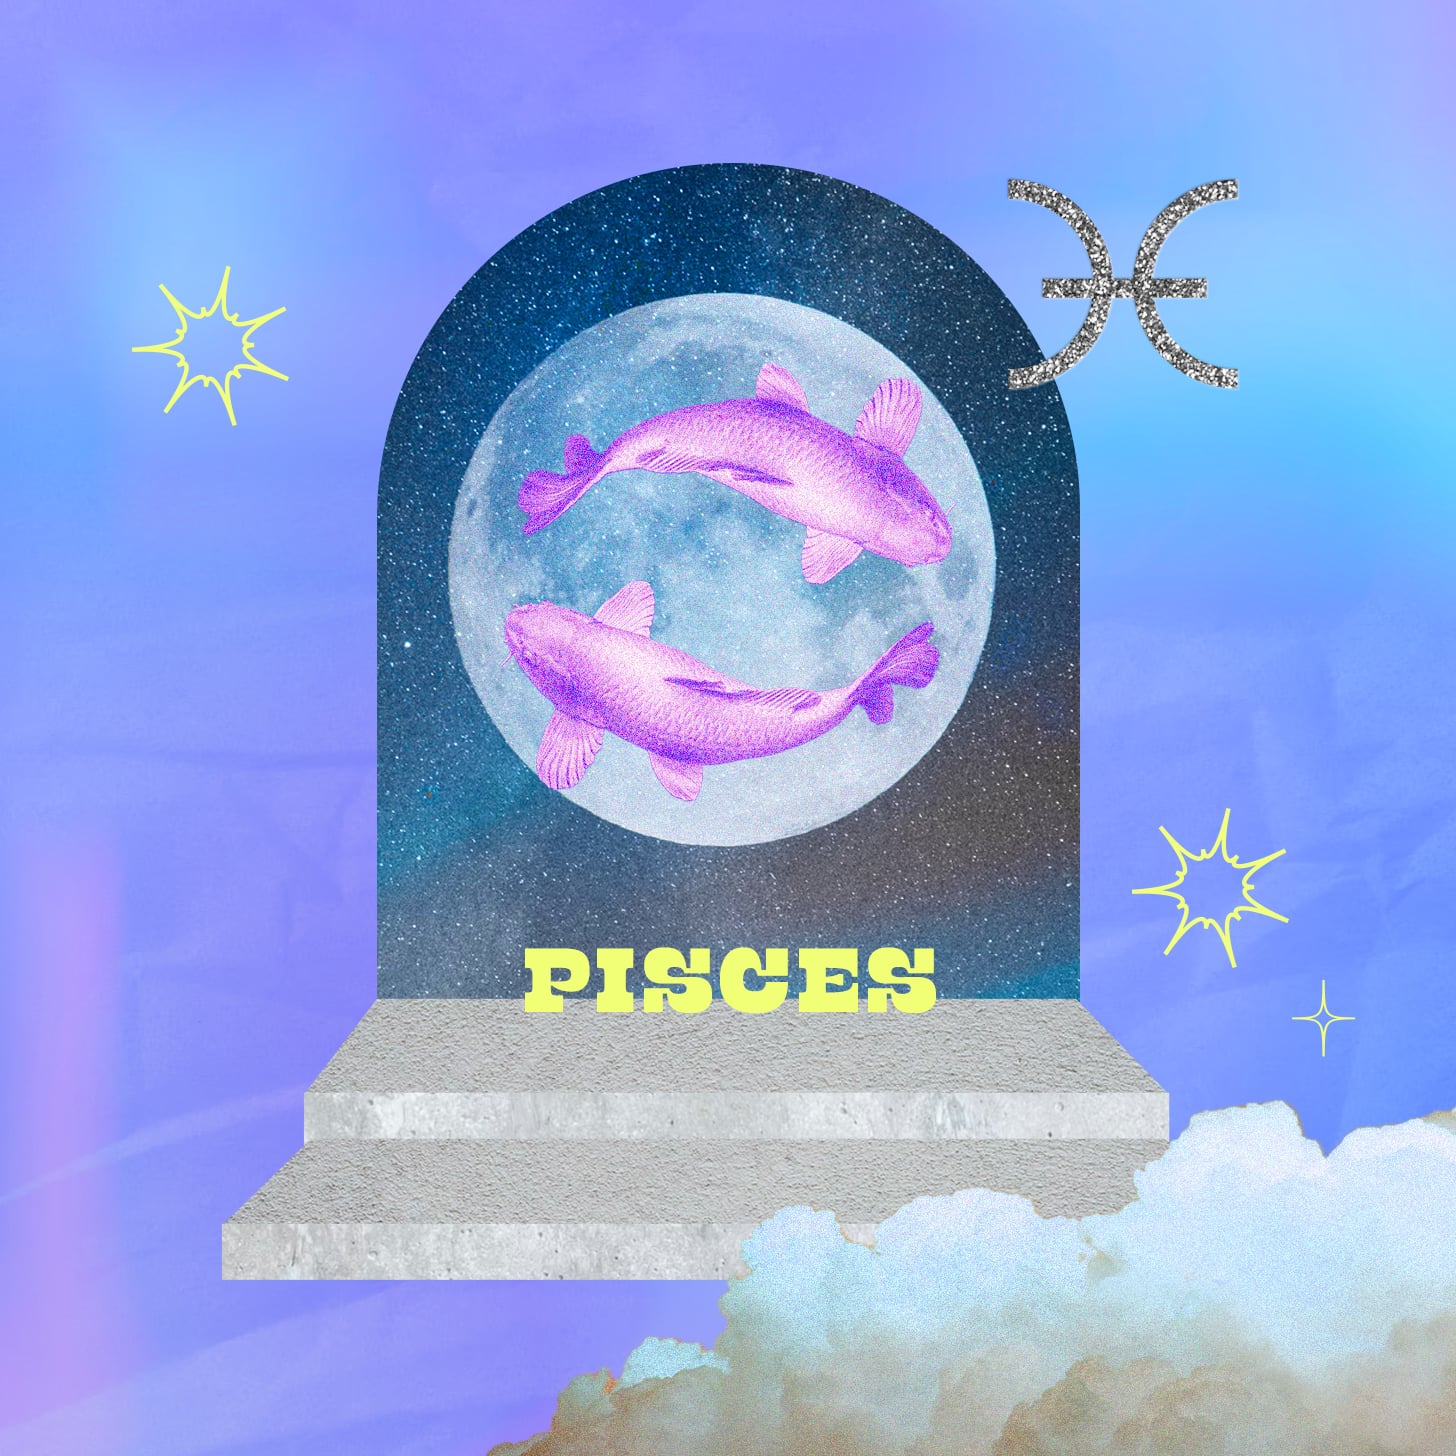 Pisces weekly horoscope for august 14, 2022